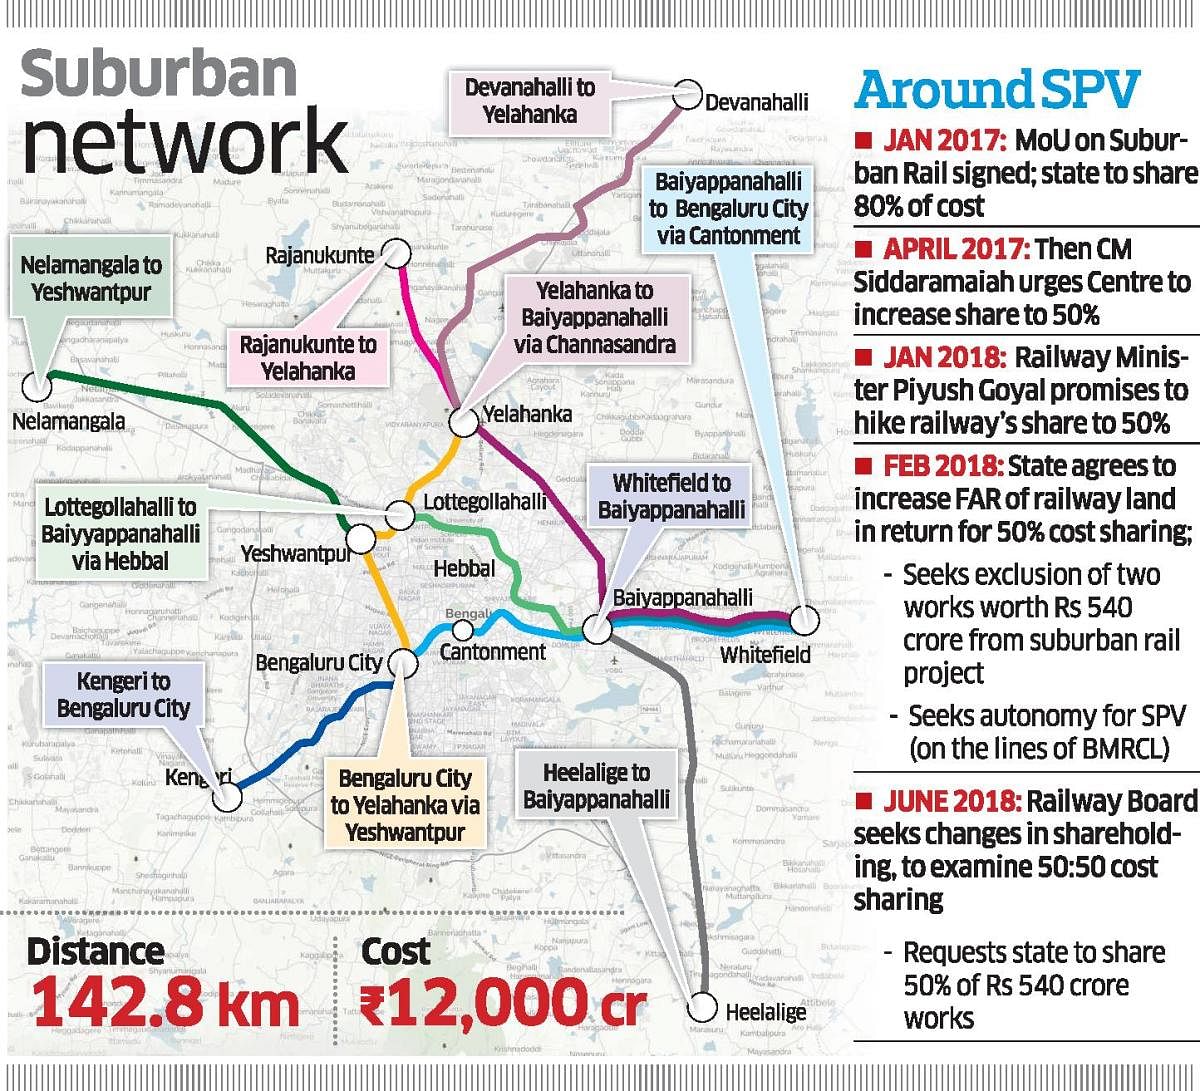 While the Railway Board is yet to decide on sharing costs, the state government seems to be in a bind over financing old projects sanctioned by the railways. (DH Graphic)